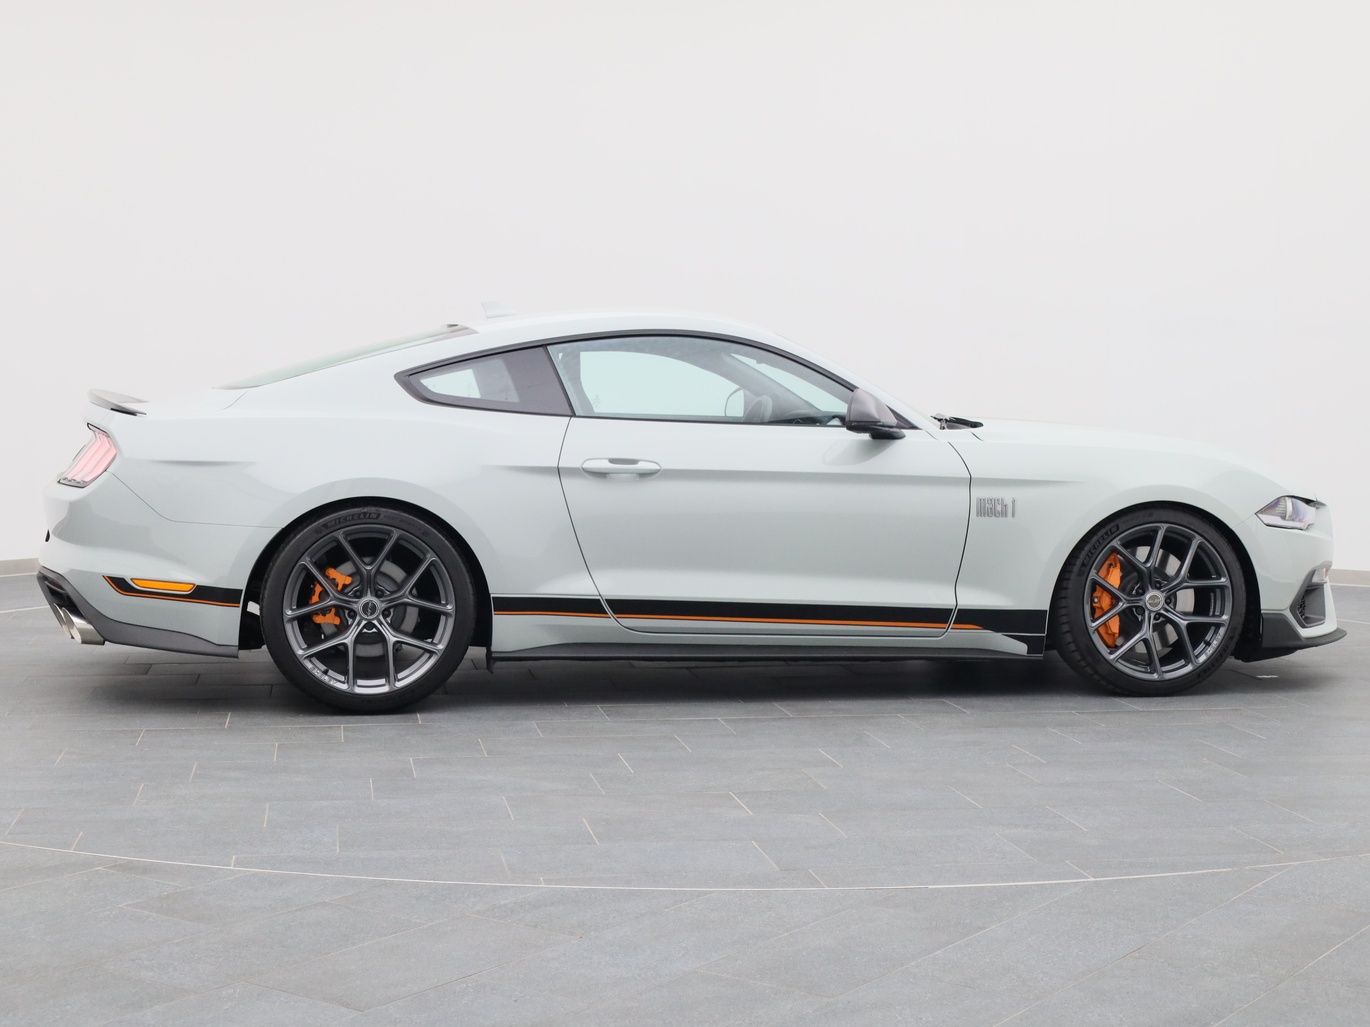  Ford Mustang Customized Mach1 750PS in Fighter Jet Gray 